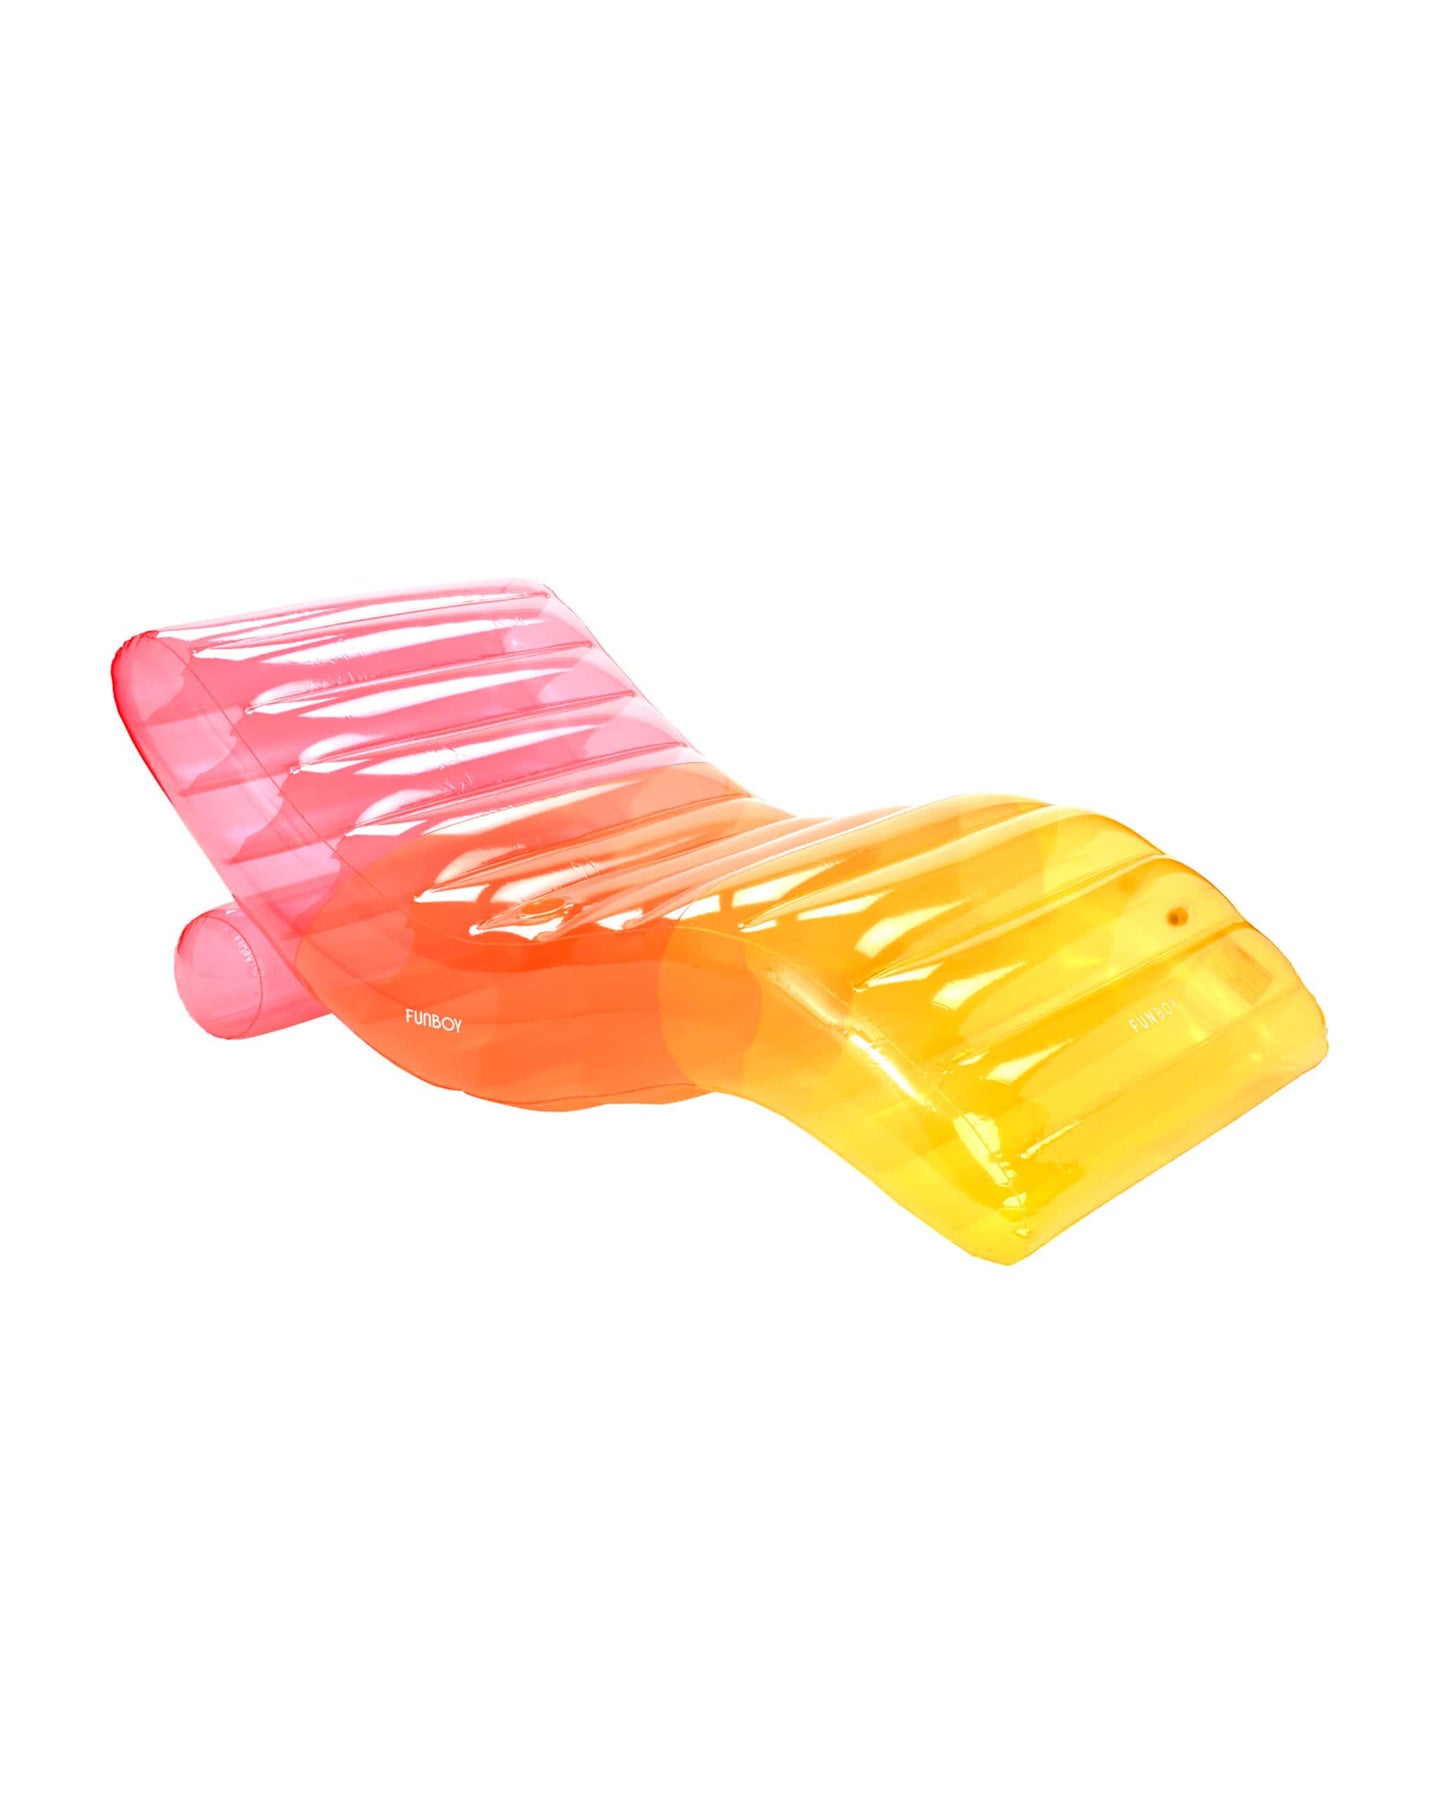 Luxury Pool Floats - Clear Rainbow Chaise Lounger Pool Float